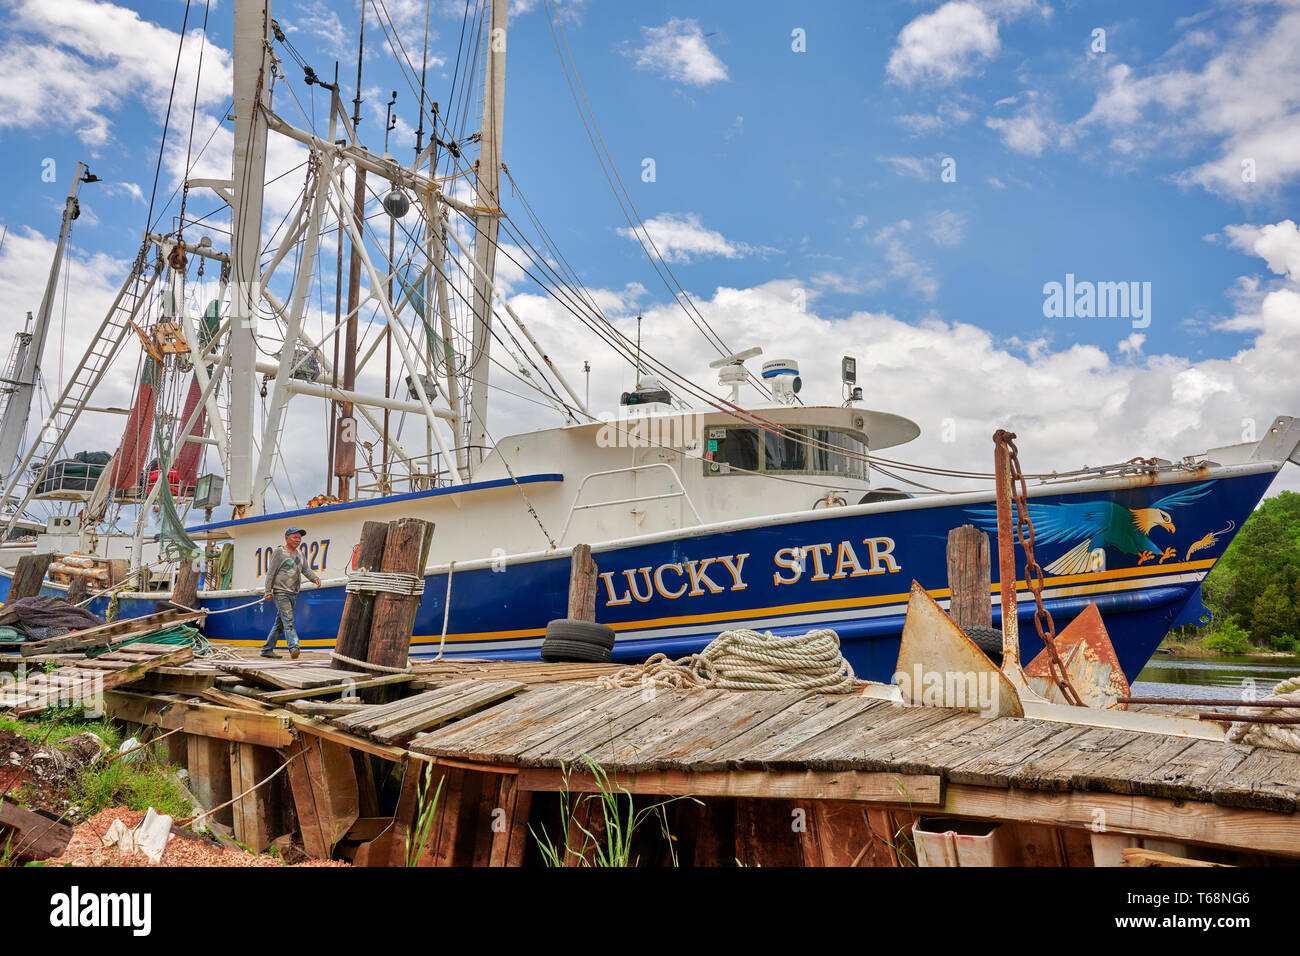 Commercial fishing boats and shrimp boats, Lucky Star, part of the fishing fleet, tied up  in Bayou La Batre Alabama, USA. Stock Photo